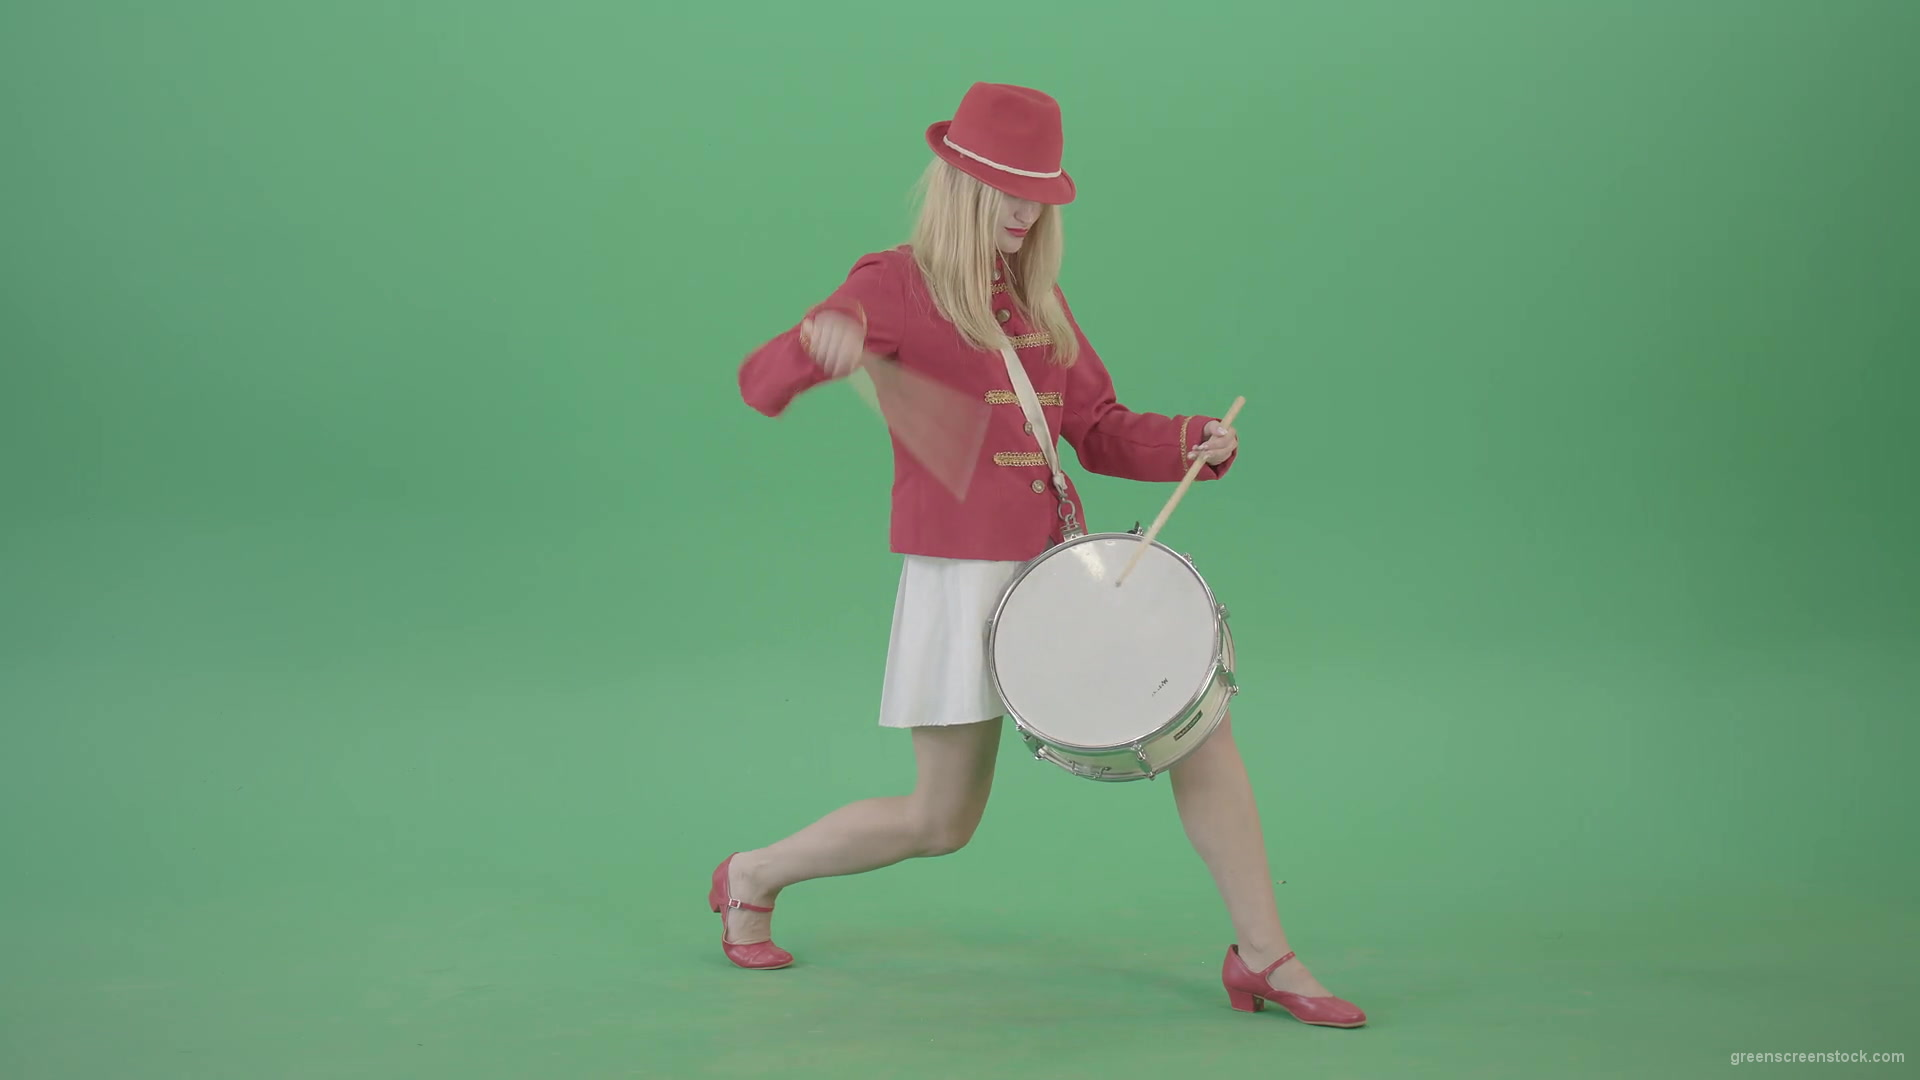 Blonde-Girl-in-Red-Uniform-making-beats-on-music-drum-instrument-in-active-pose-on-green-screen-4K-Video-Footage-1920_008 Green Screen Stock